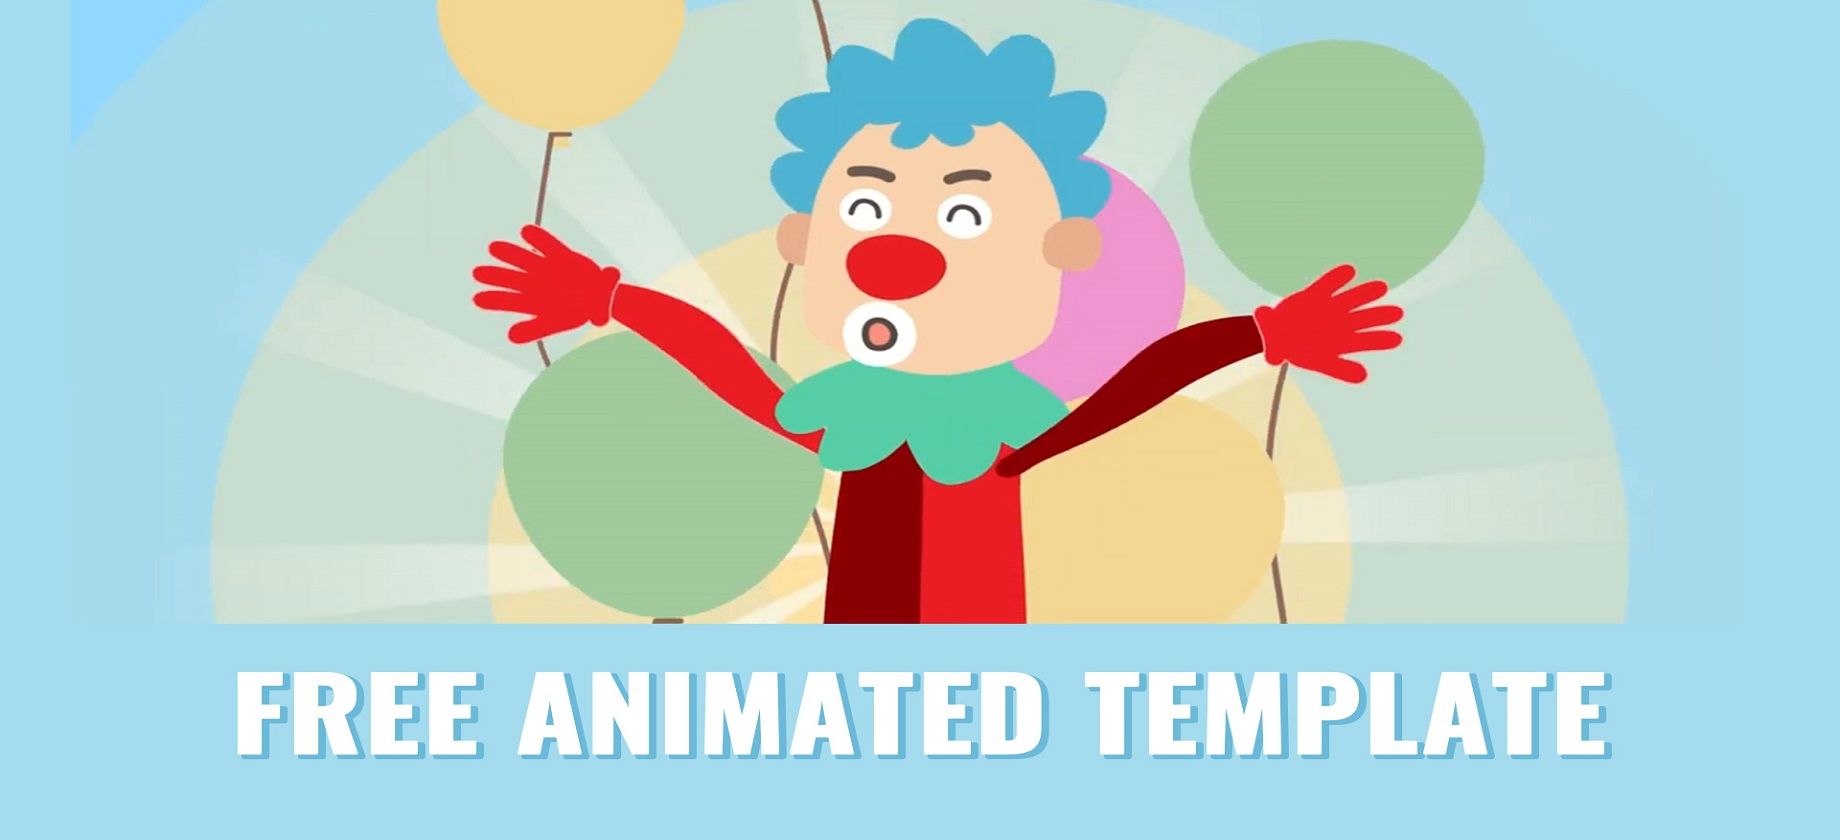 5 Free Animated Graphic Templates for Daily Use